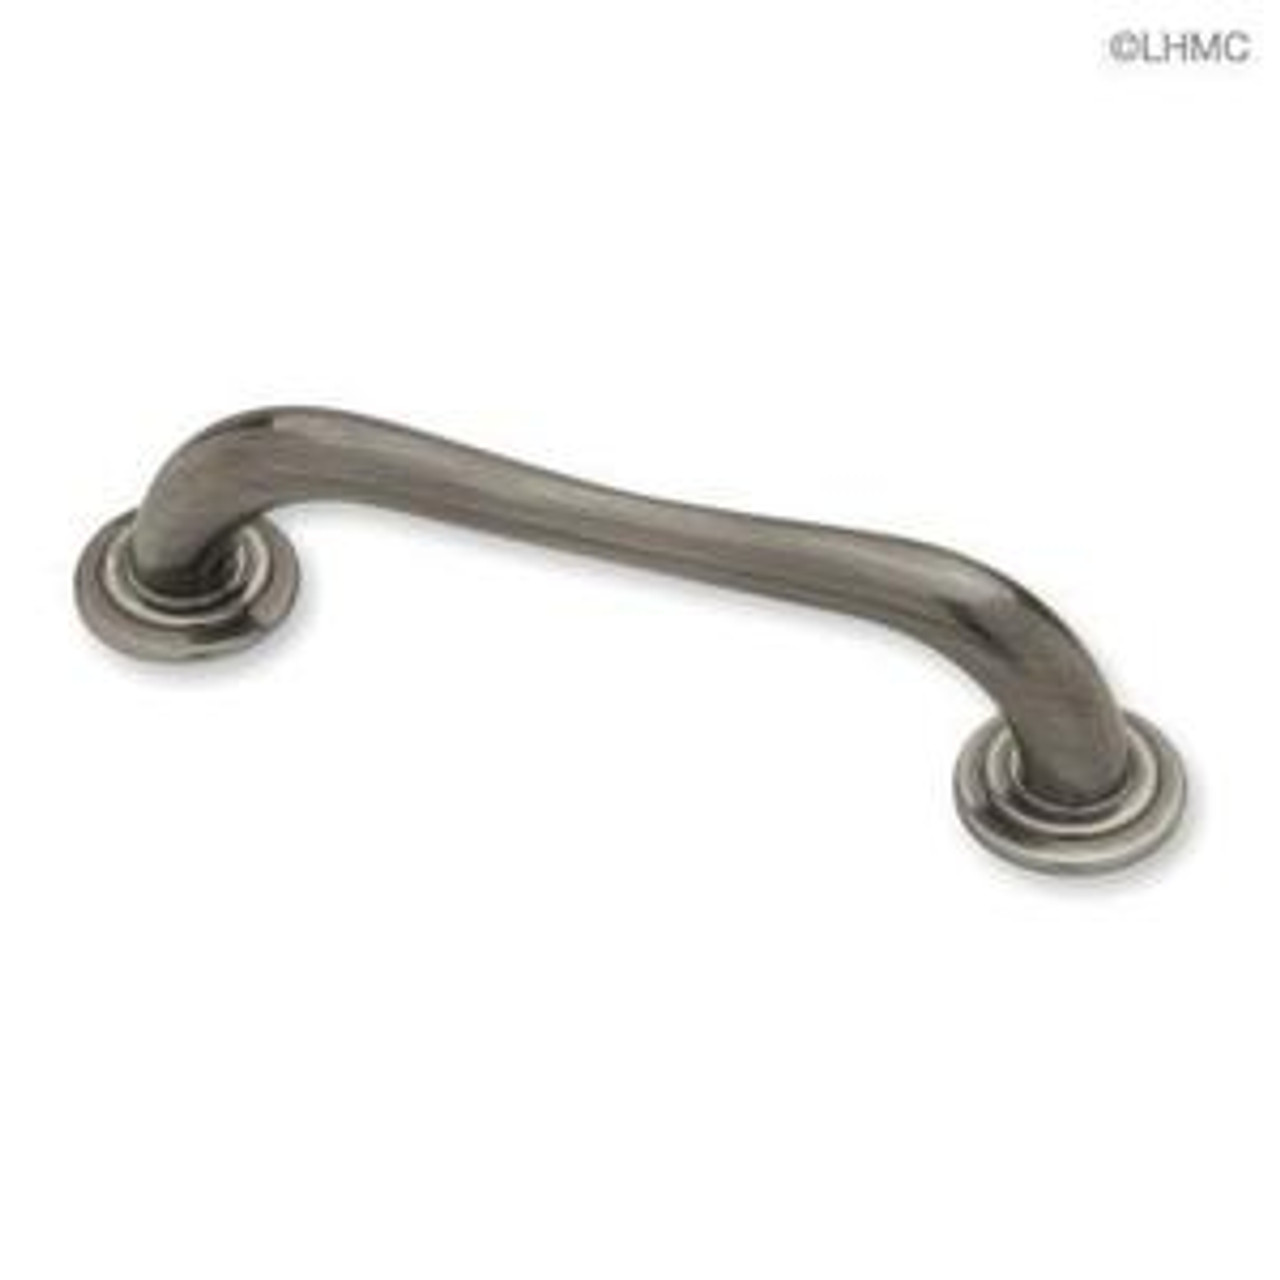 PN0596C-BNP Brushed Nickel Greco Roman w/ Backplates Drawer Cabinet Pull